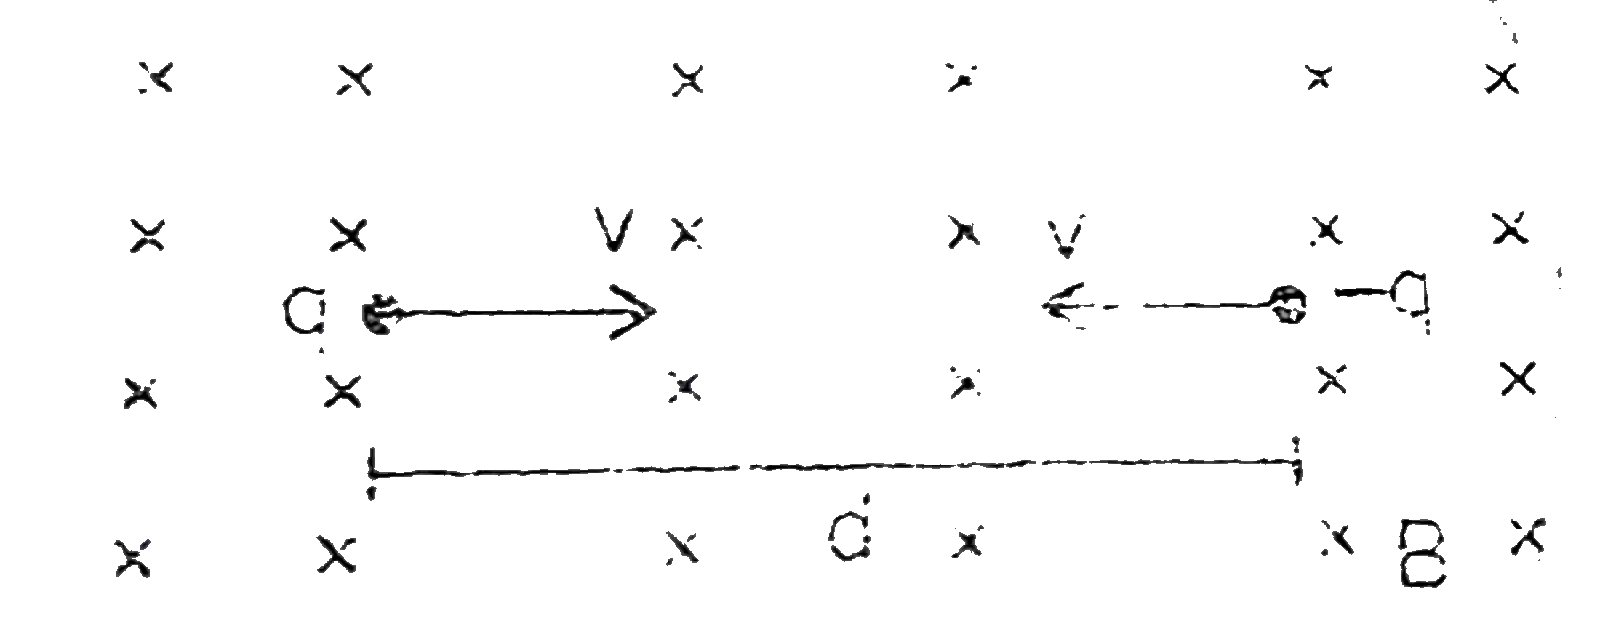 Two particle, each having a mass m are placed at a separation d in a uniform magnetic field B as shown in figure.They have opposite charges of equal magnitude q.At time t=0, the particles are projected towards each other, each with a speed v.   At what instant will a collision occur between the particles if v=2v(m)?